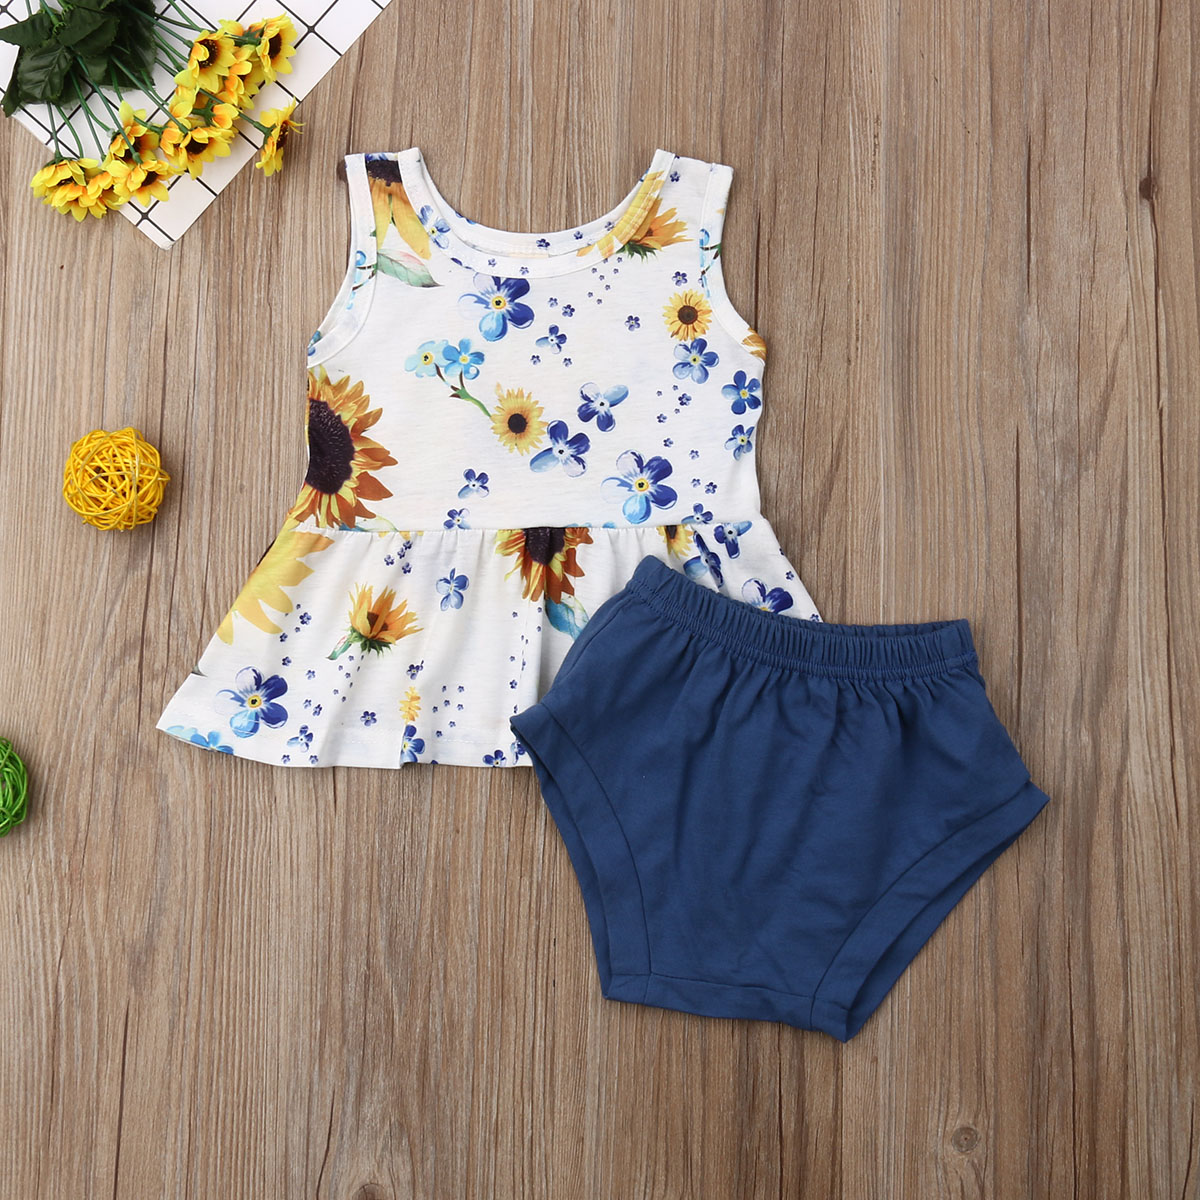 infant sunflower outfit